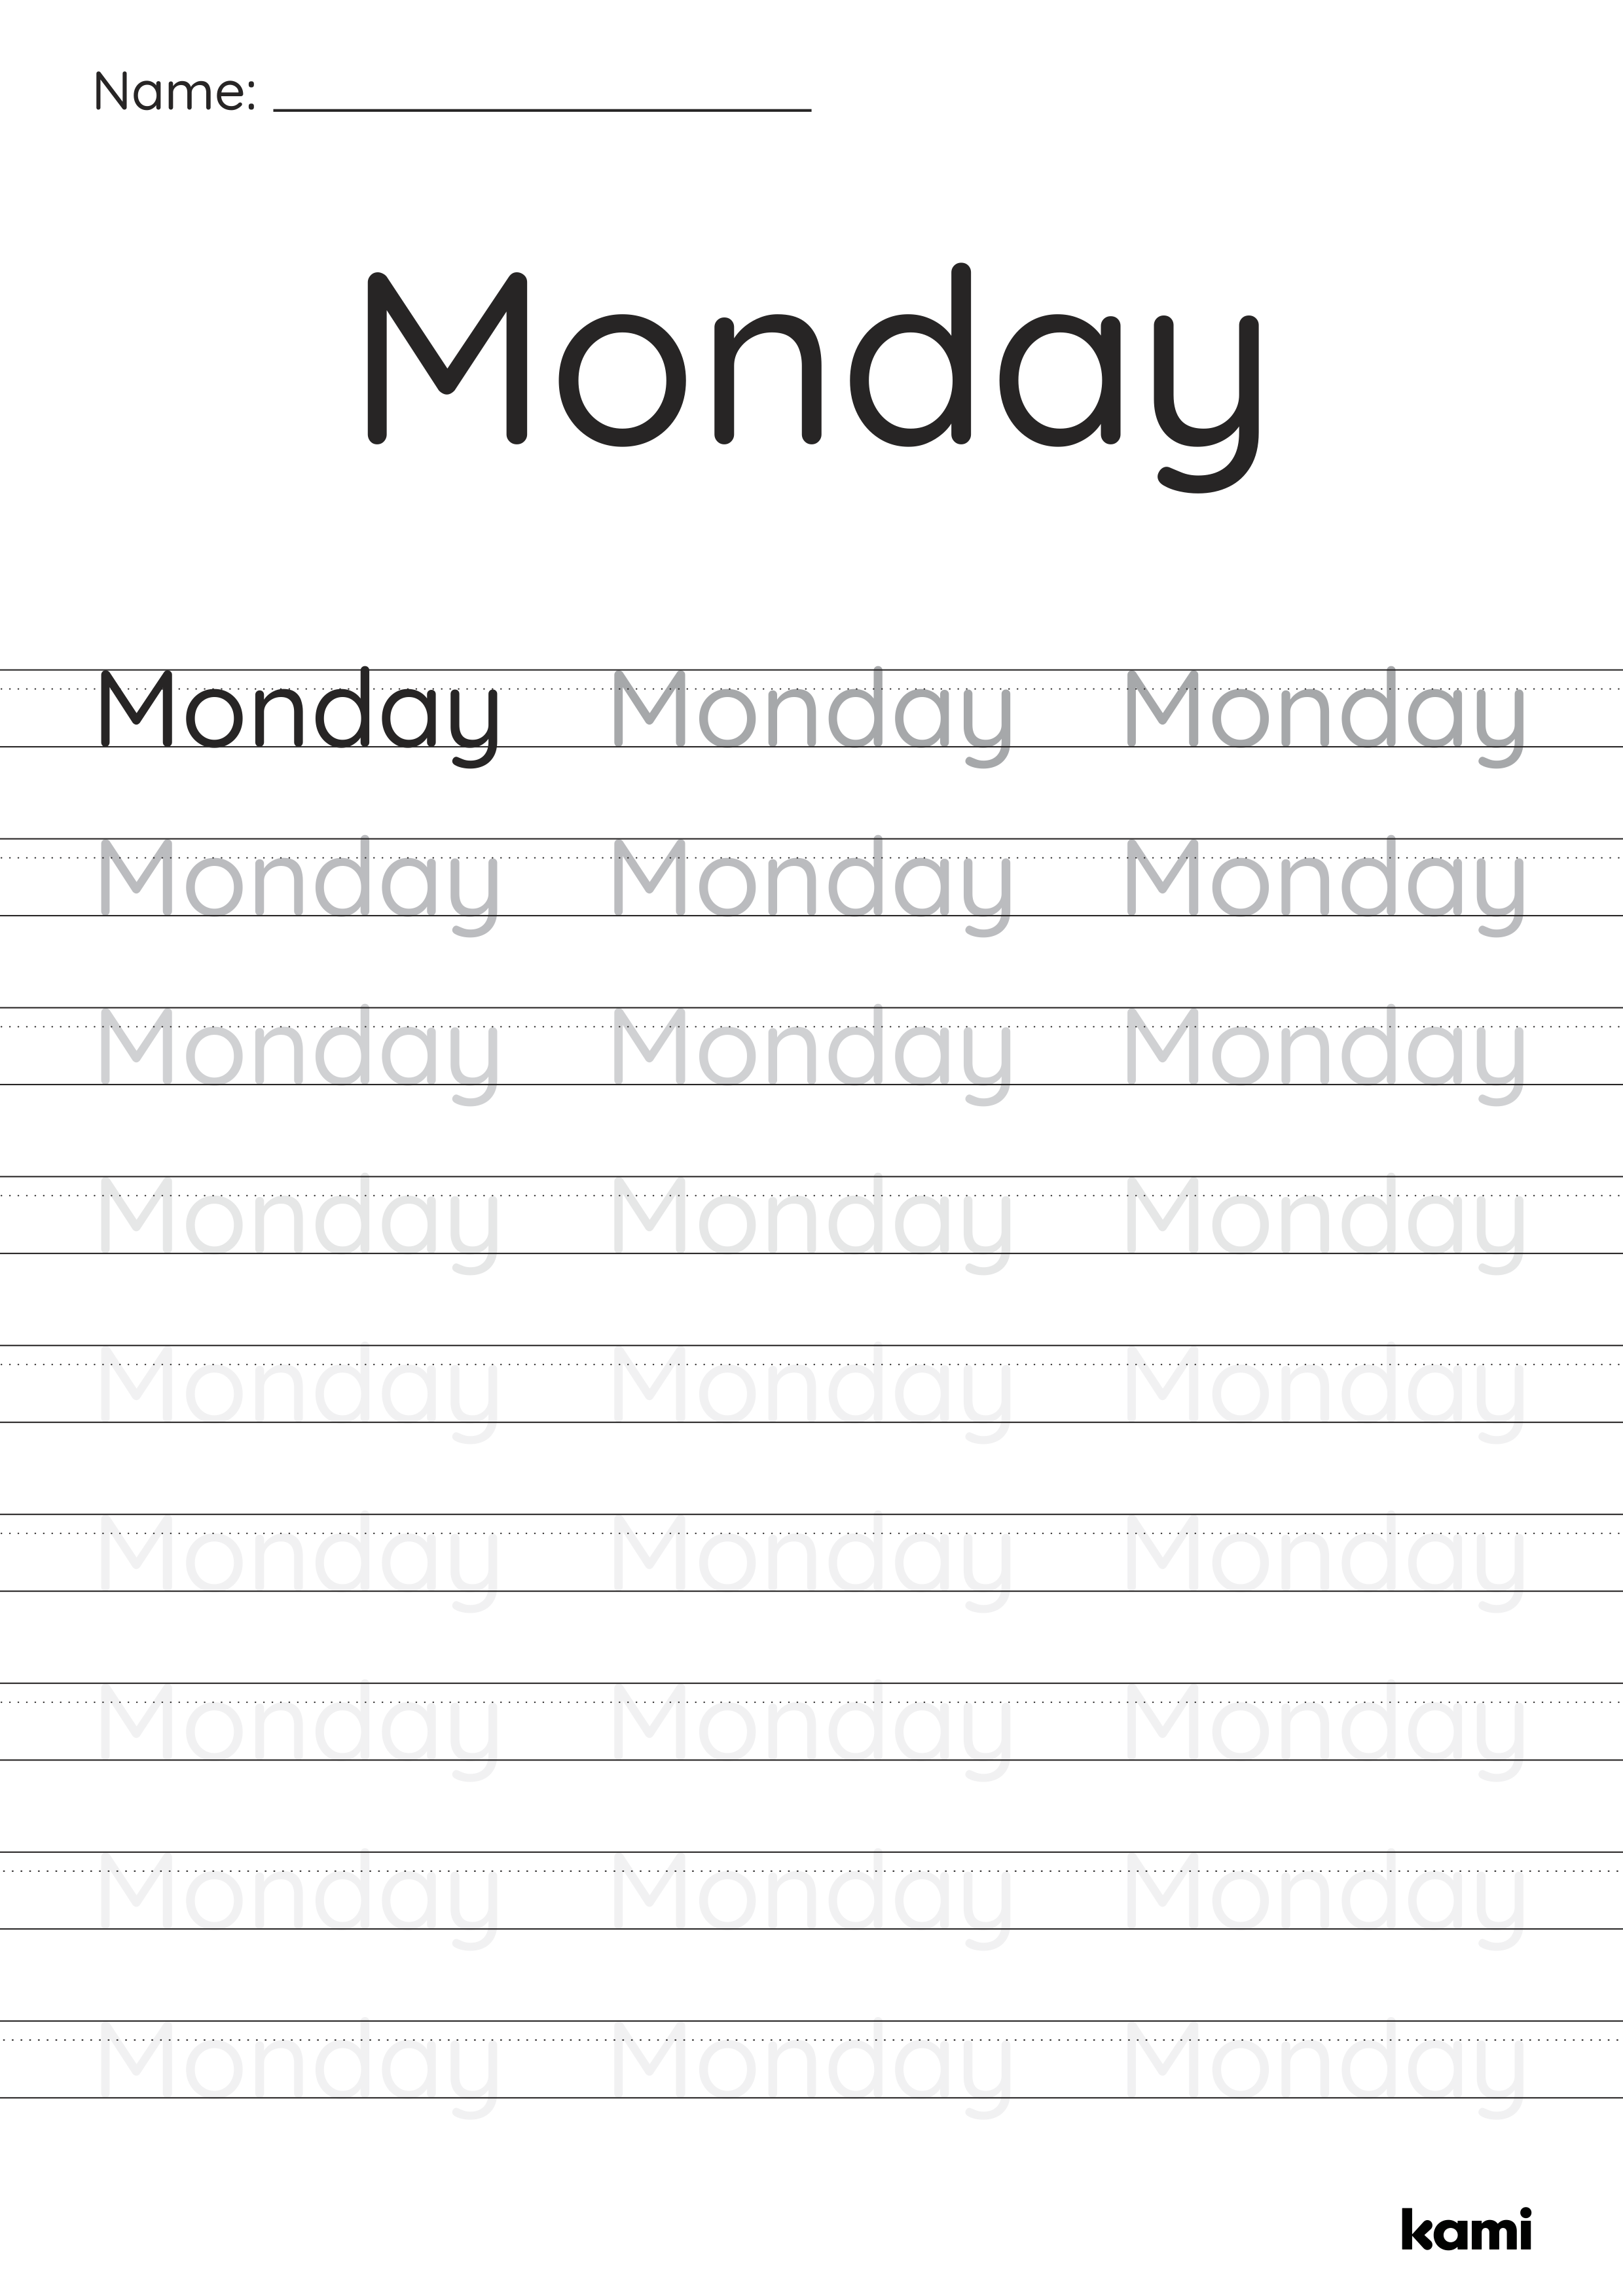 A handwriting worksheet for Pre-K - 1st graders with a days of the week design